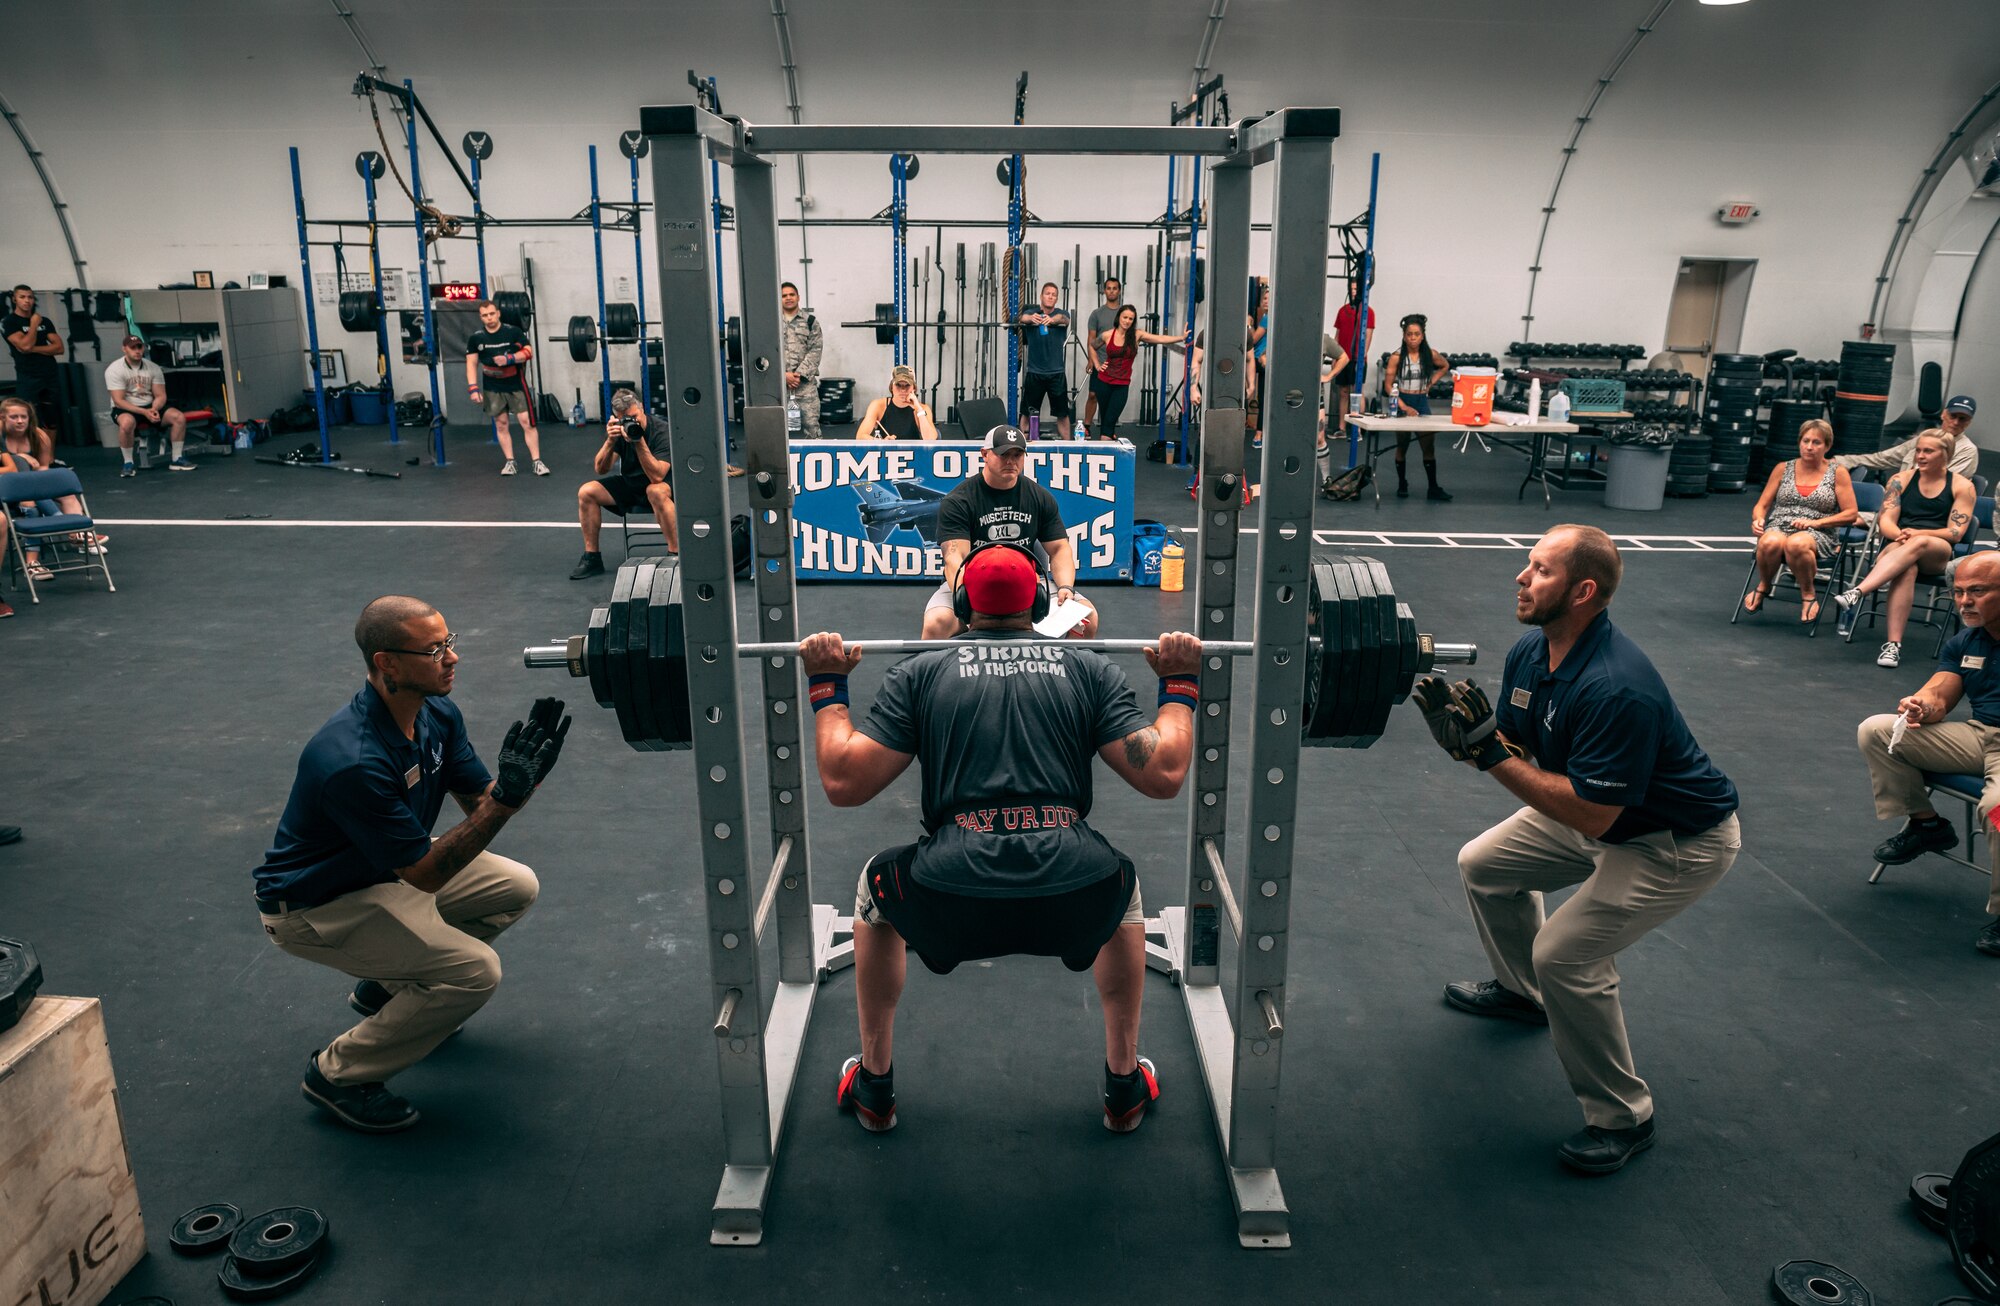 Staff Sgt. Thomas Penny, 56th Component Maintenance Squadron aircraft fuel systems craftsman, performs a squat during the Luke Air Force Base Powerlifting Competition at Luke AFB, Ariz., May 18, 2018. The competition consisted of workouts to include bench presses, squats, and deadlifts. (U.S. Air Force photo by Airman 1st Class Alexander Cook)